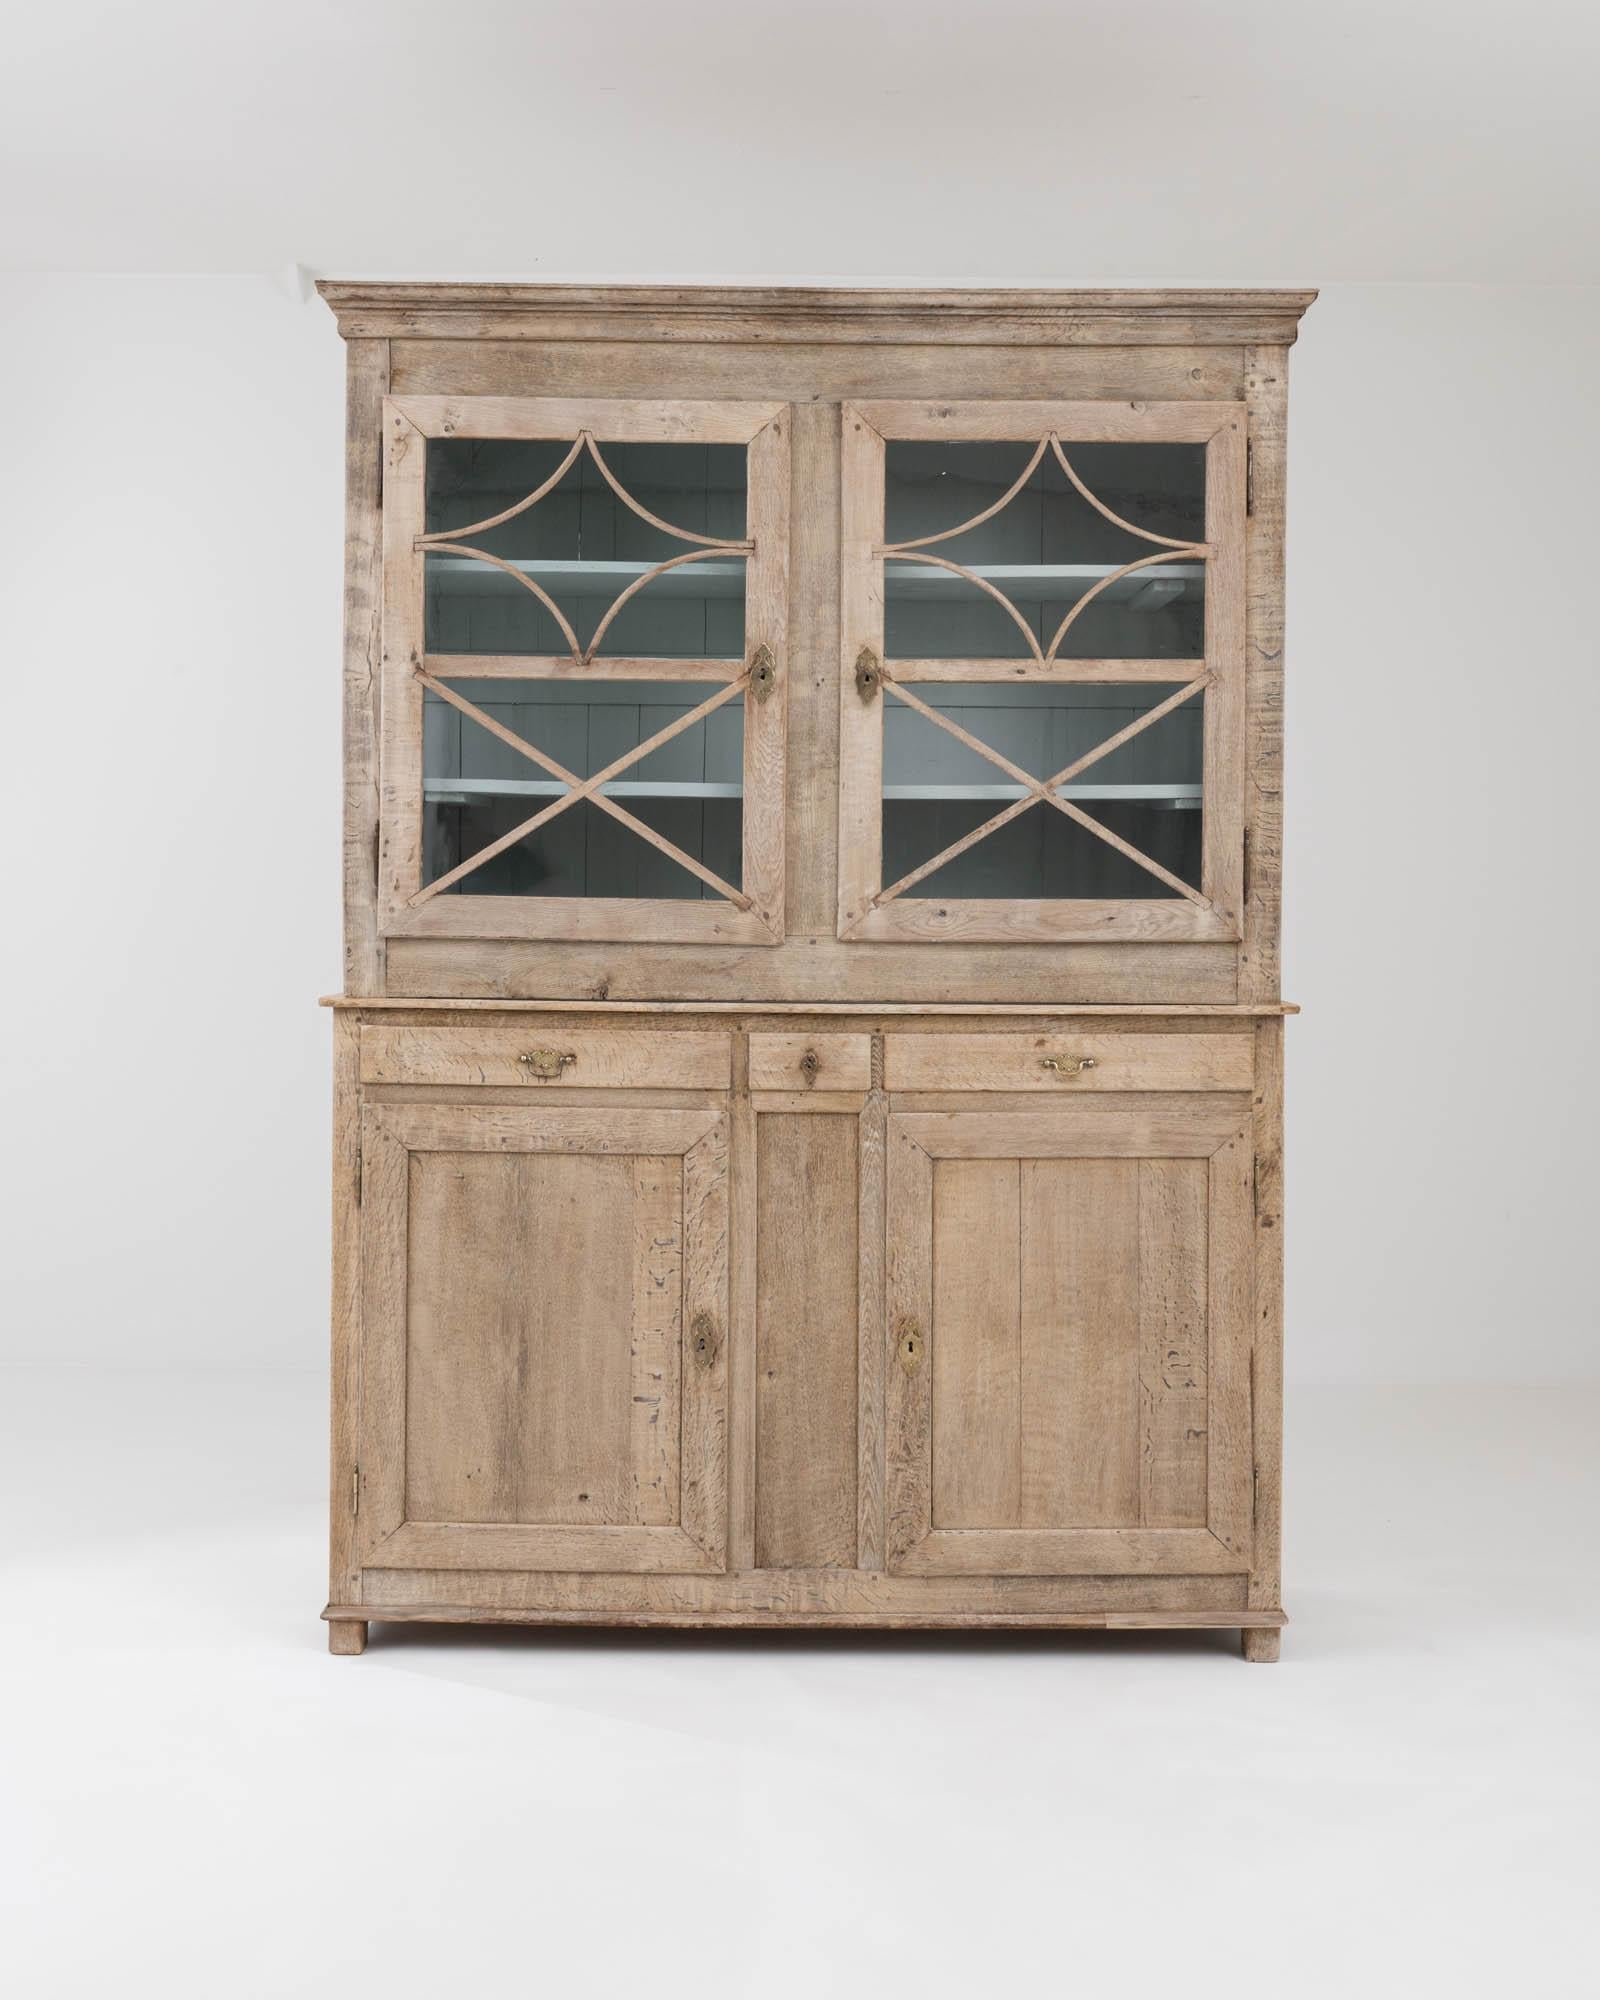 Beautifully crafted to stand the test of time, this antique oak vitrine evokes the Provincial romance of the French countryside. Built in France in the early 1800s, the simple silhouette is enlivened by the geometric mullions which decorate the